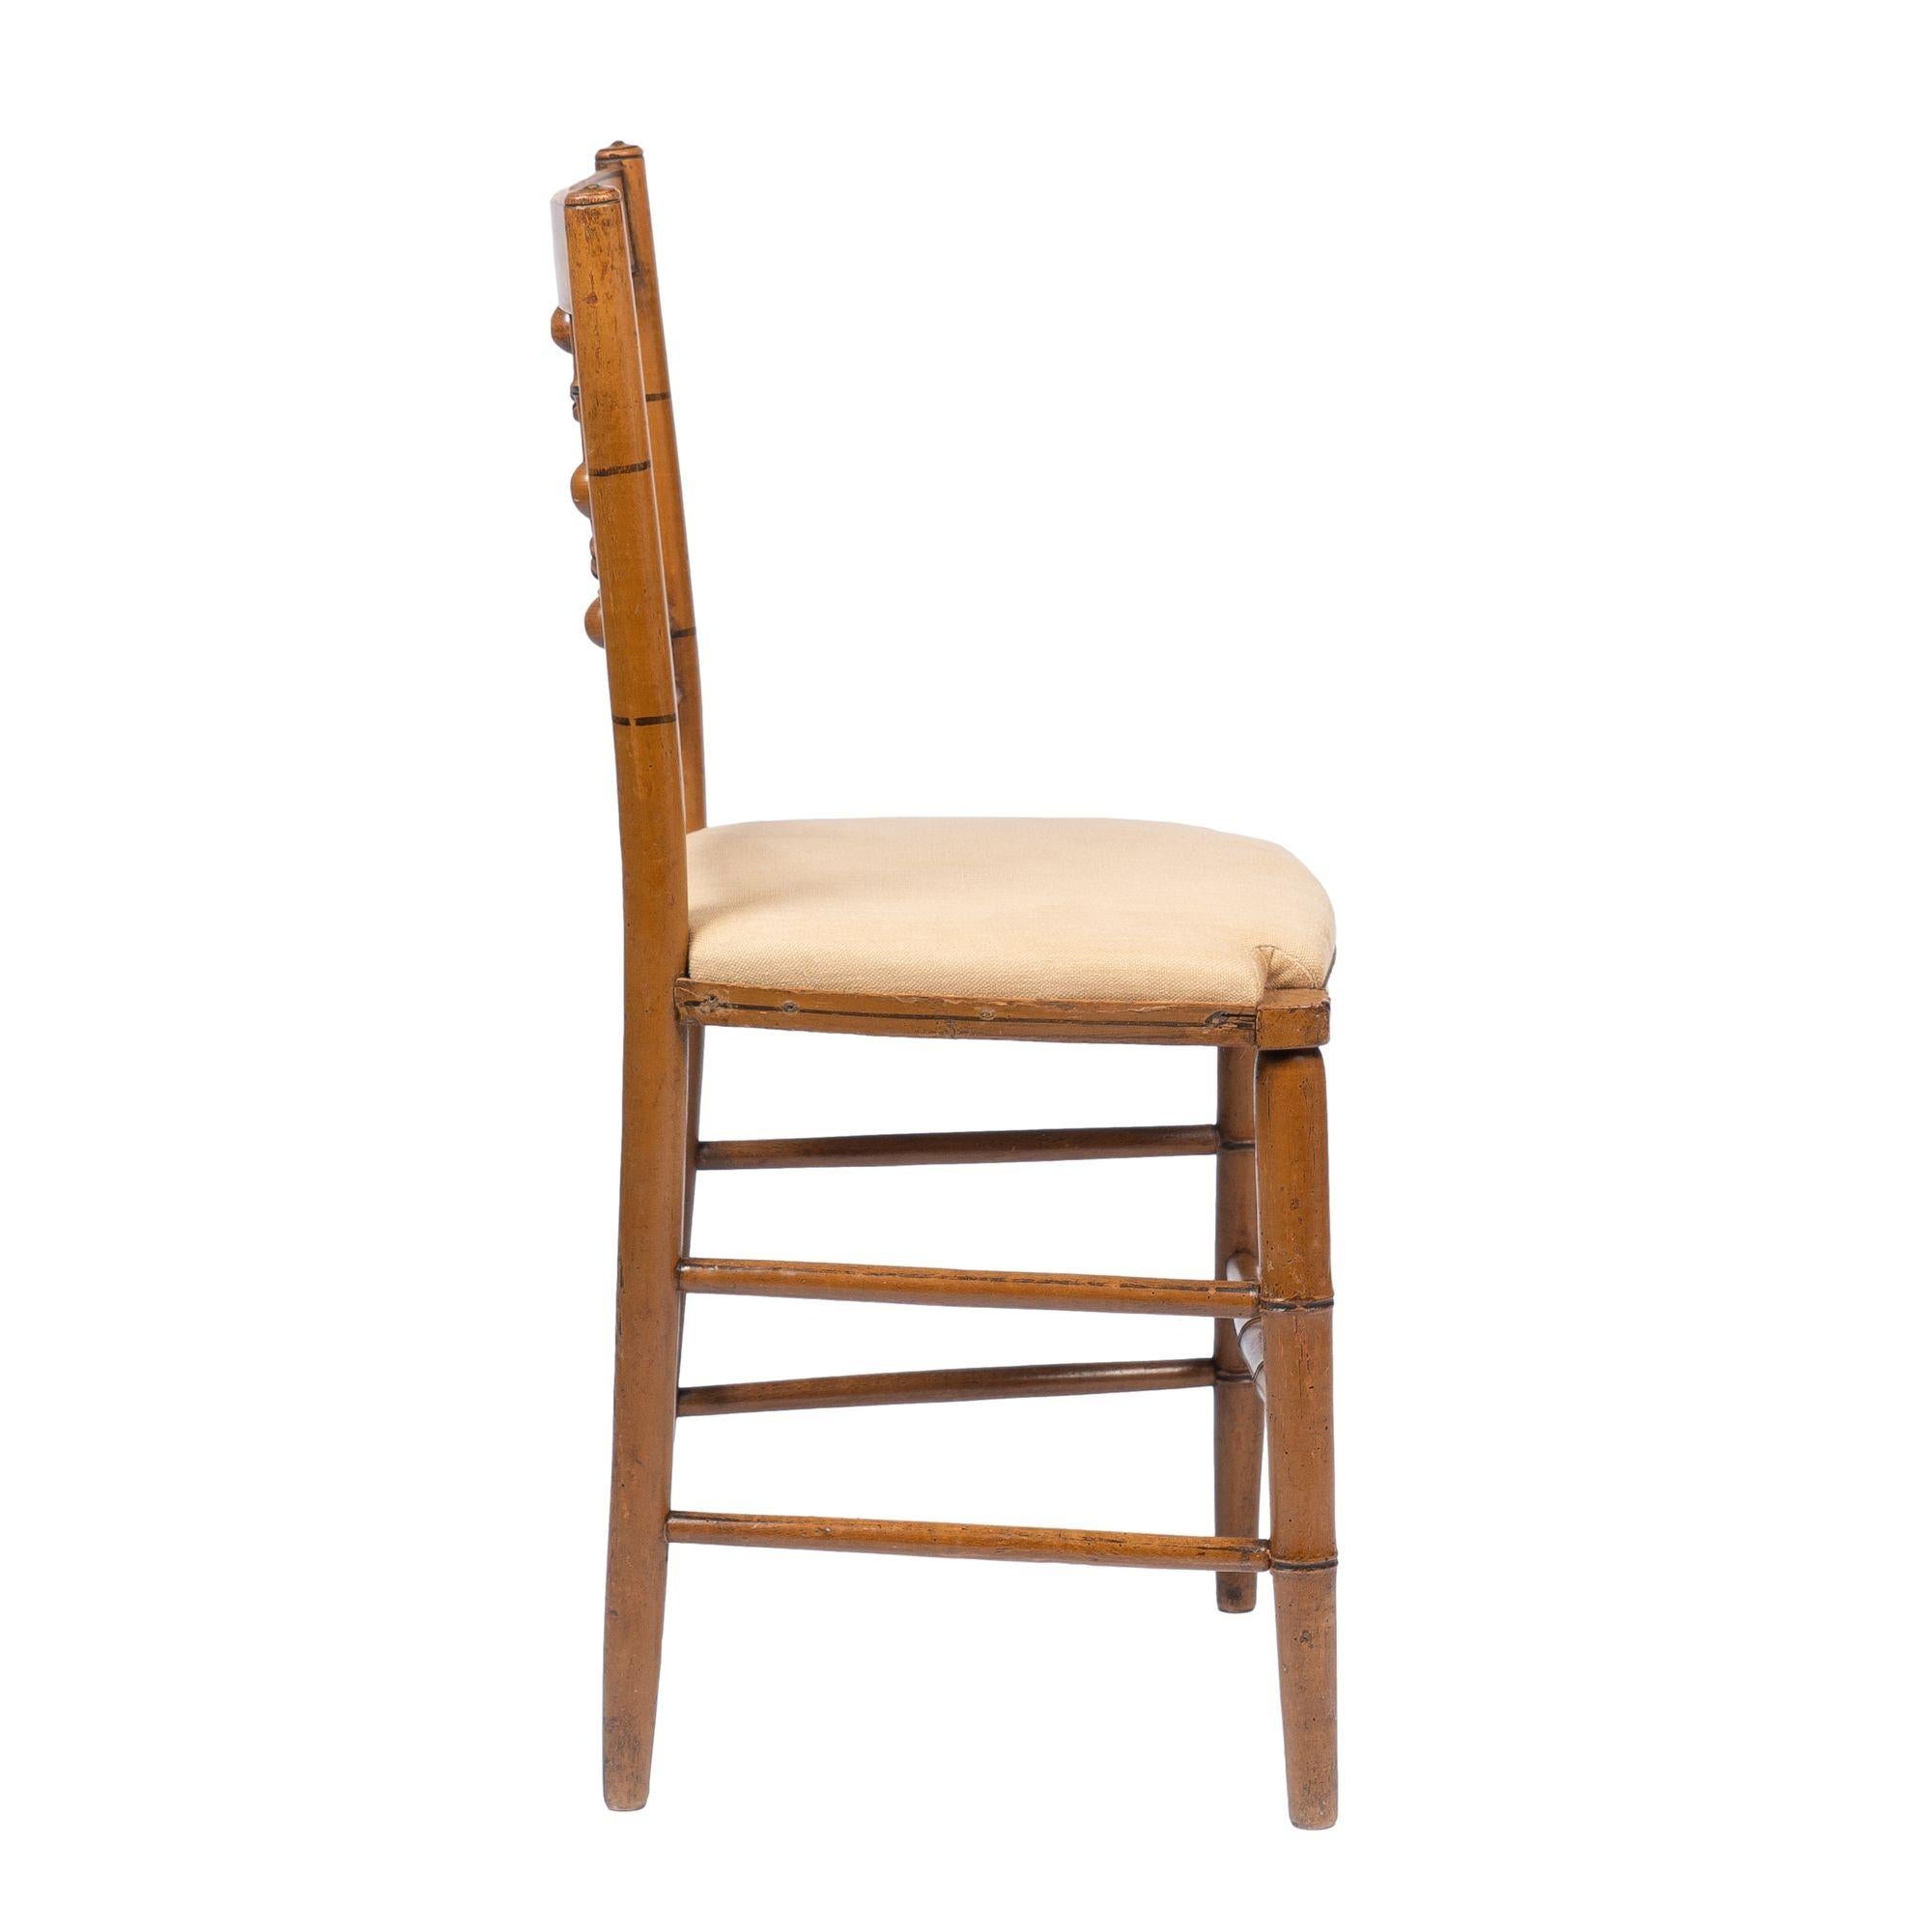 American Sheraton Painted Side Chairs with Upholstered Seats, 1800 4